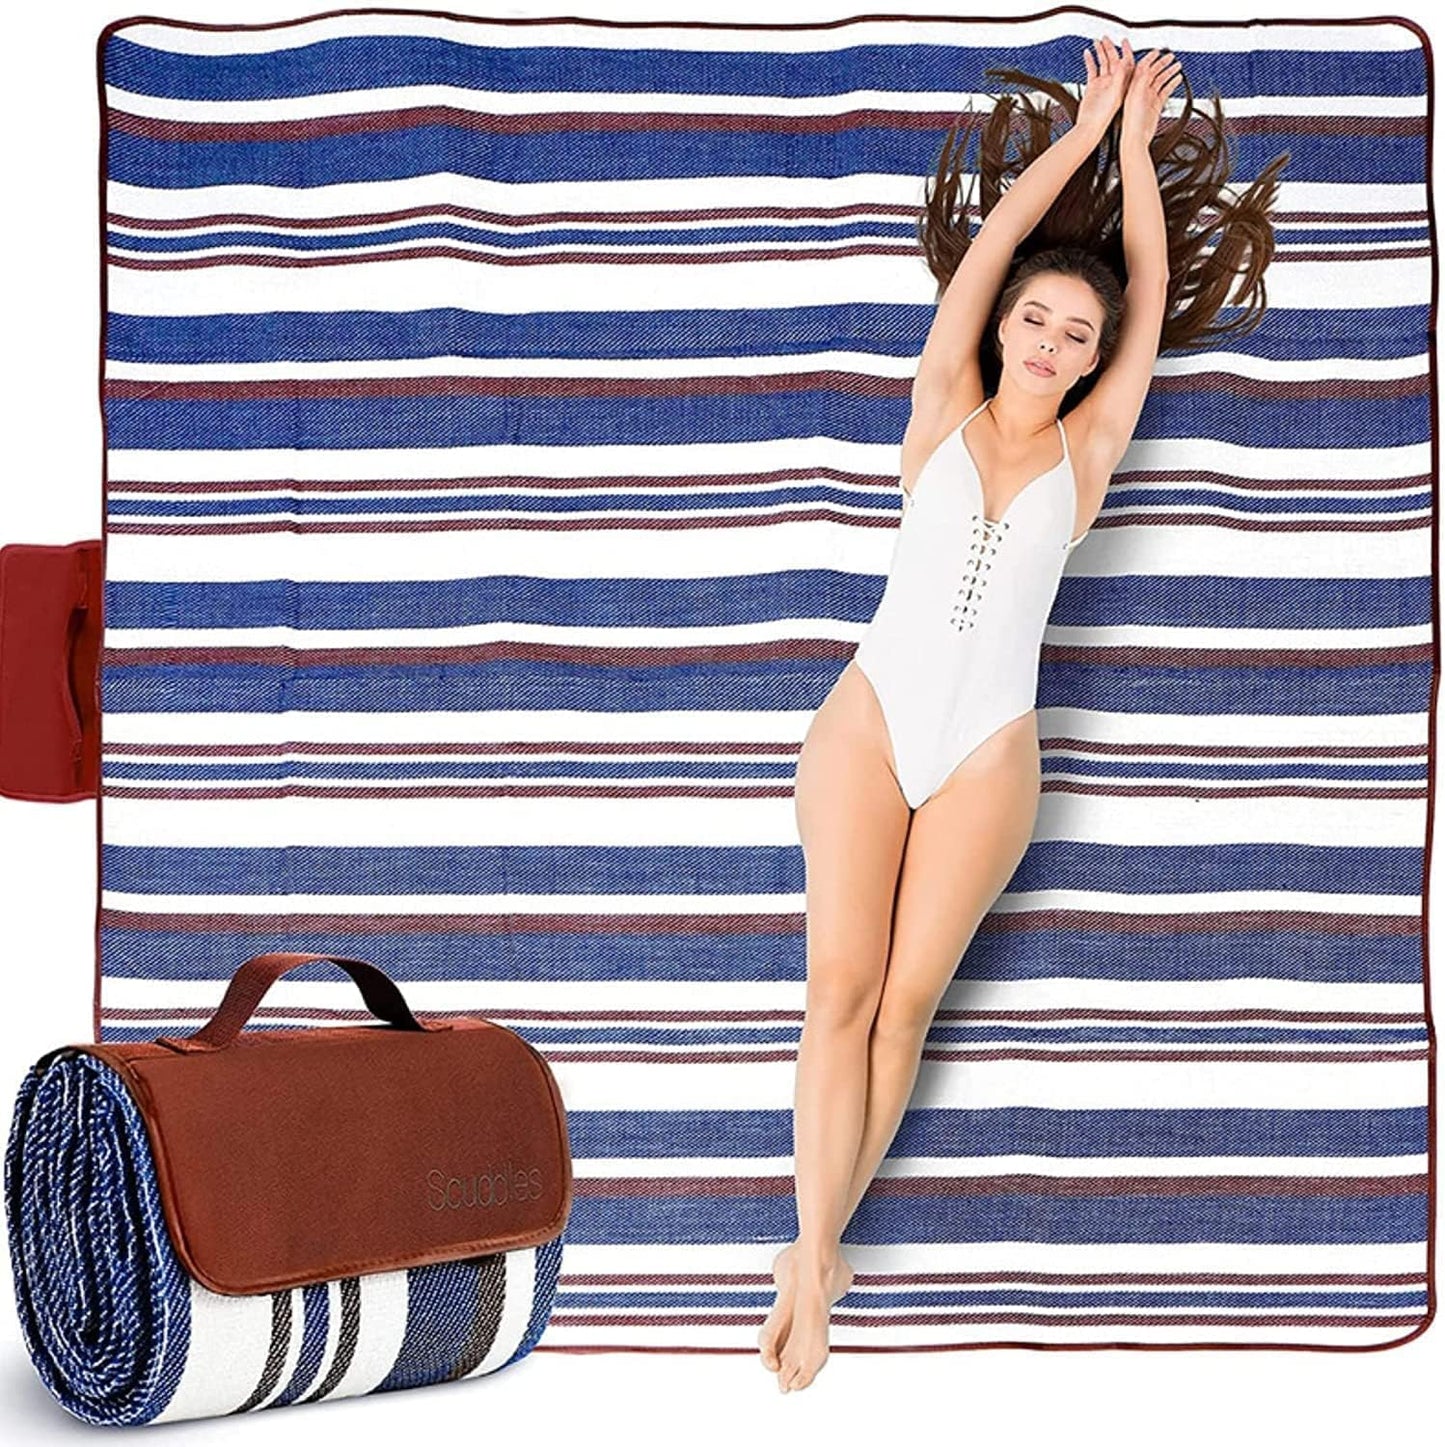 scuddles Extra Large Picnic Blanket Dual Layers Beach Blanket Waterproof Sandproof Outdoor Water-Resistant Handy Mat Tote Spring Summer Camping Blanket Great for The Beach